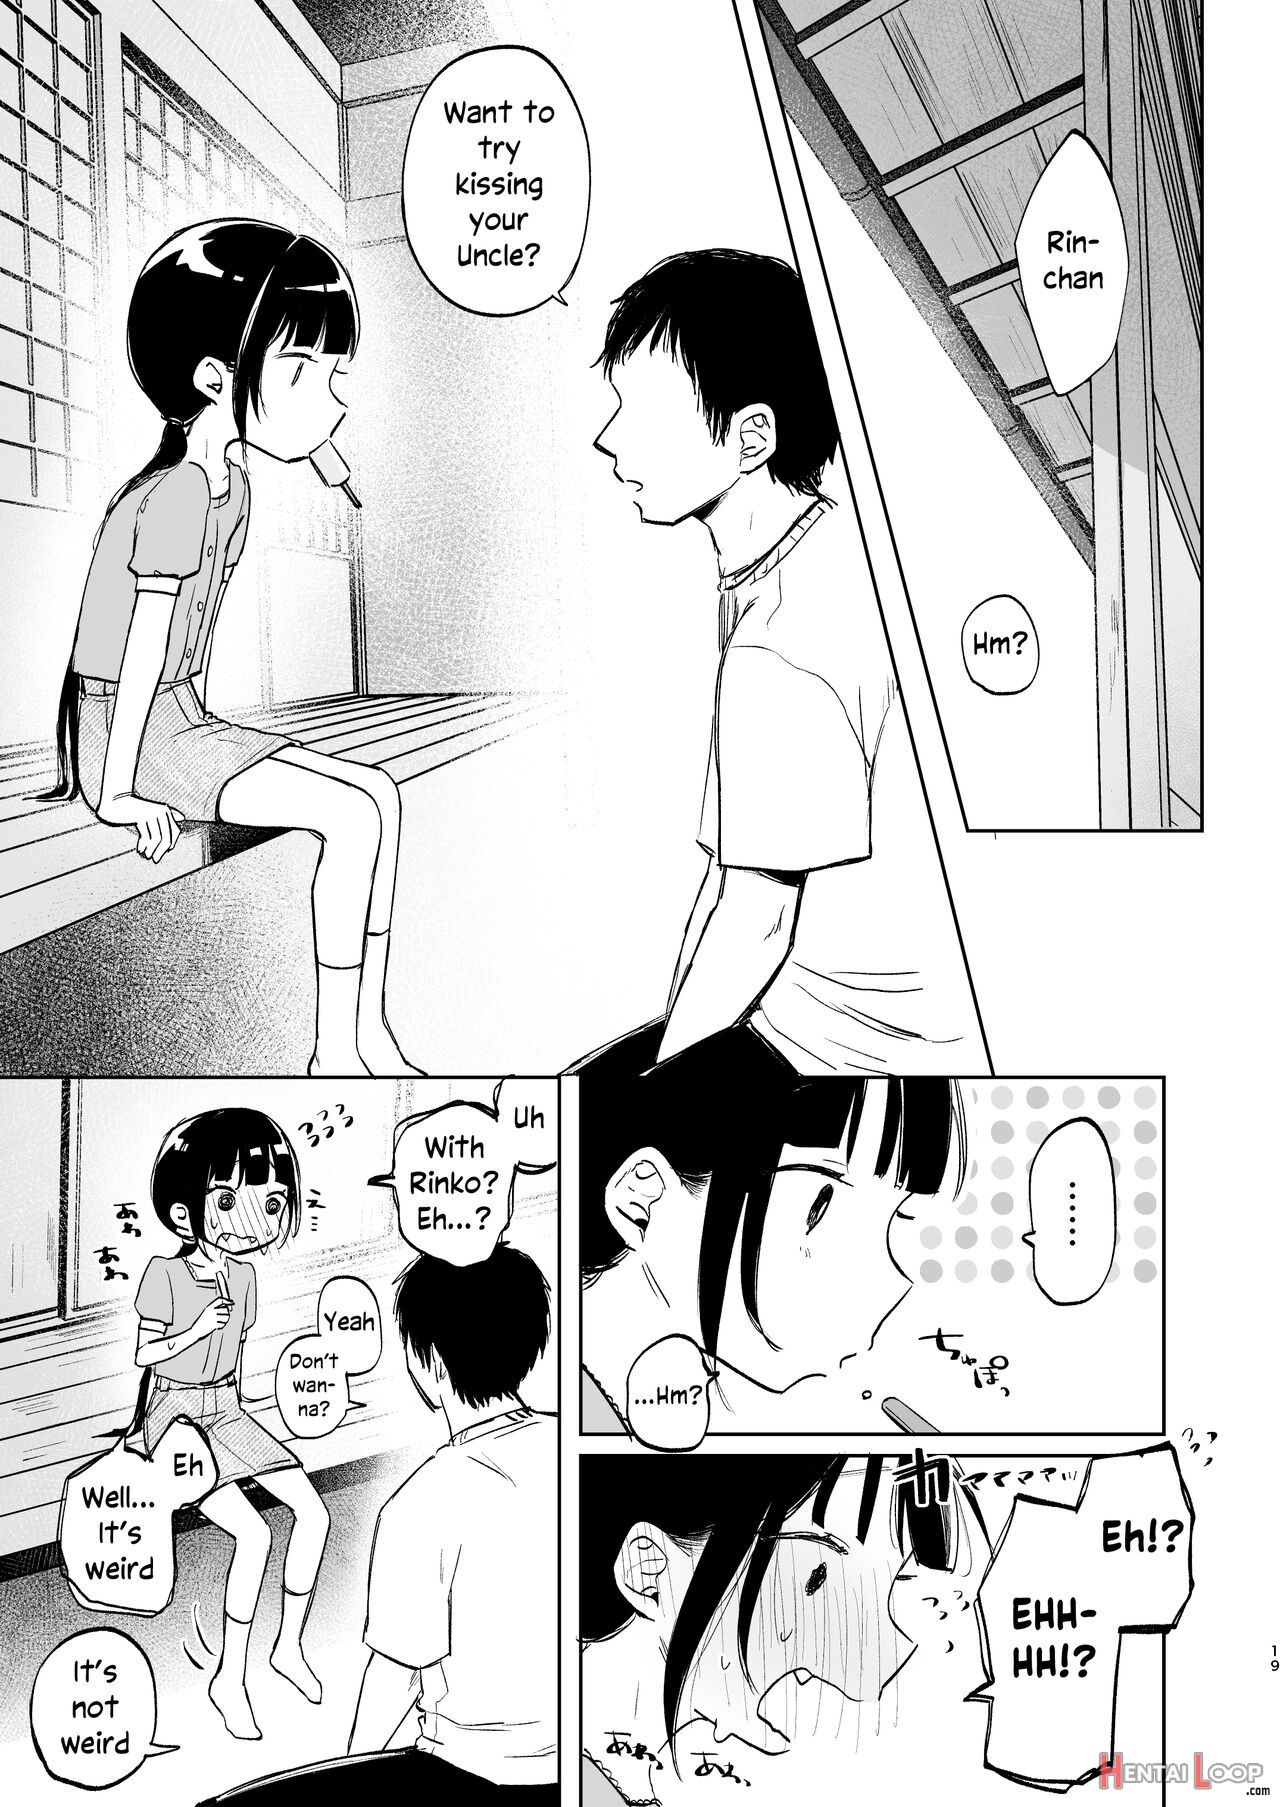 Rinko And Her Uncle's First Summer Vacation page 18